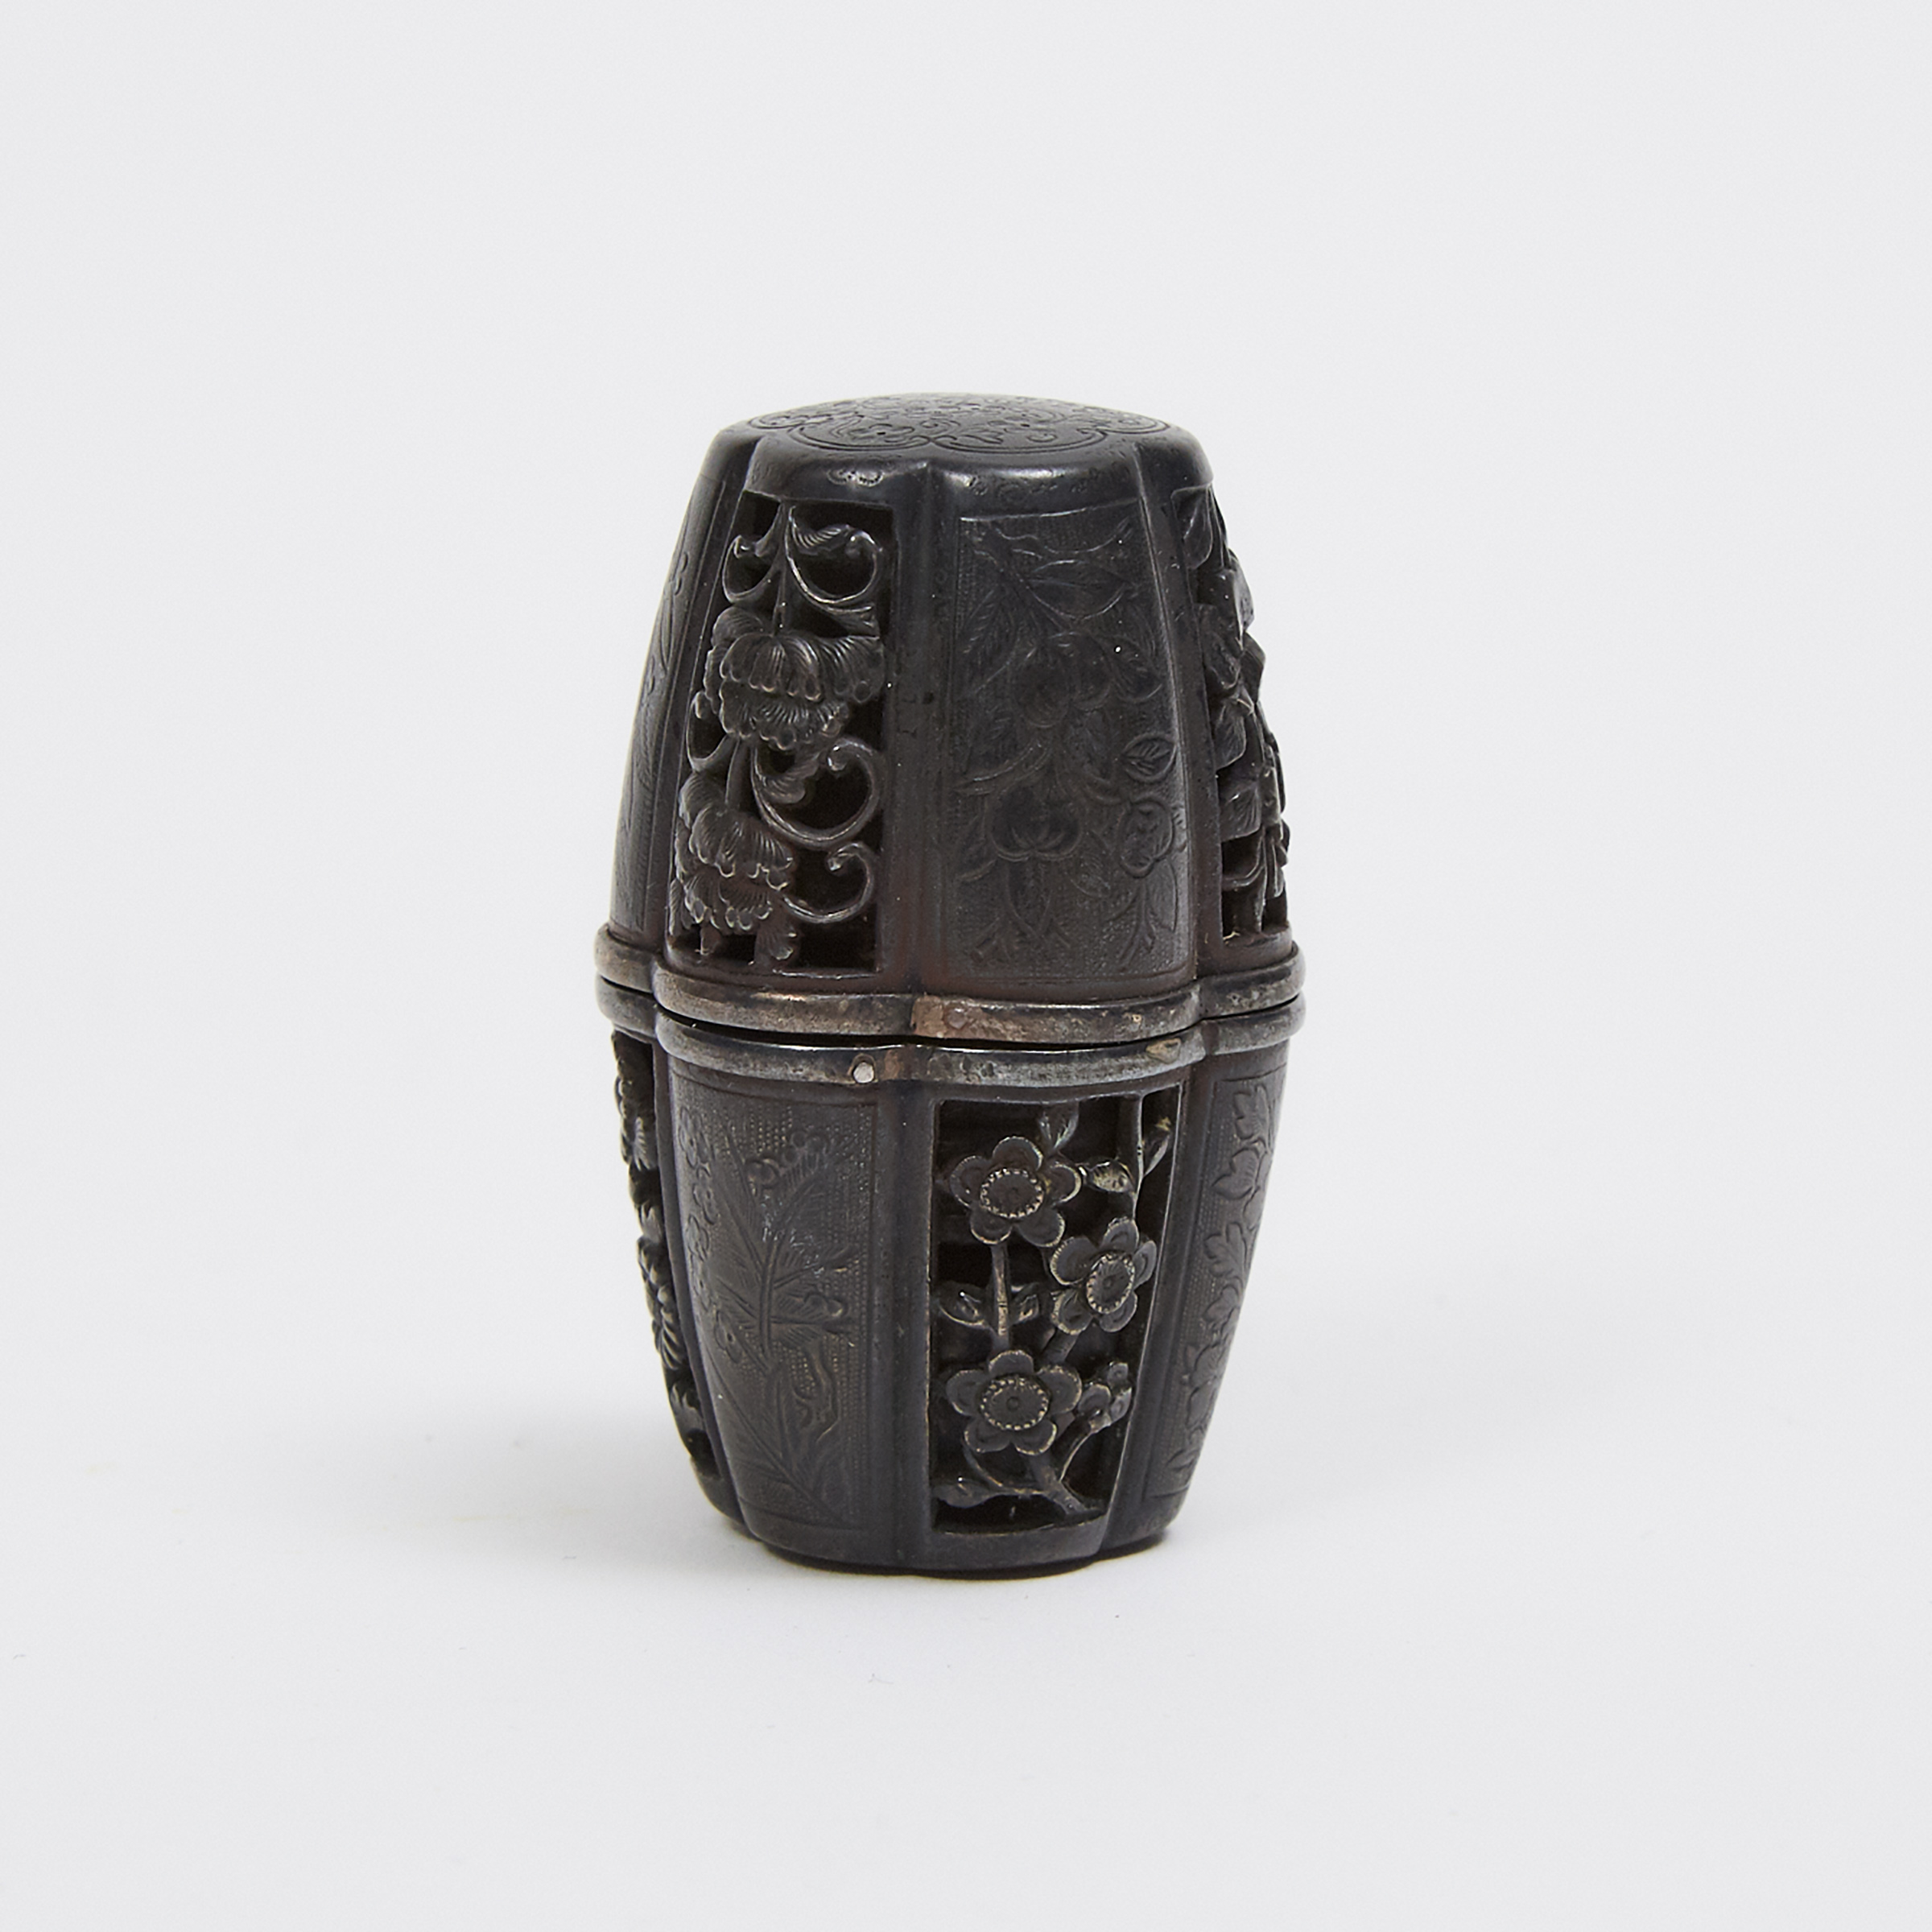 A Shakudo Metal Netsuke of a Barrel with Silver Fitting and Interior Compass, Meiji Period